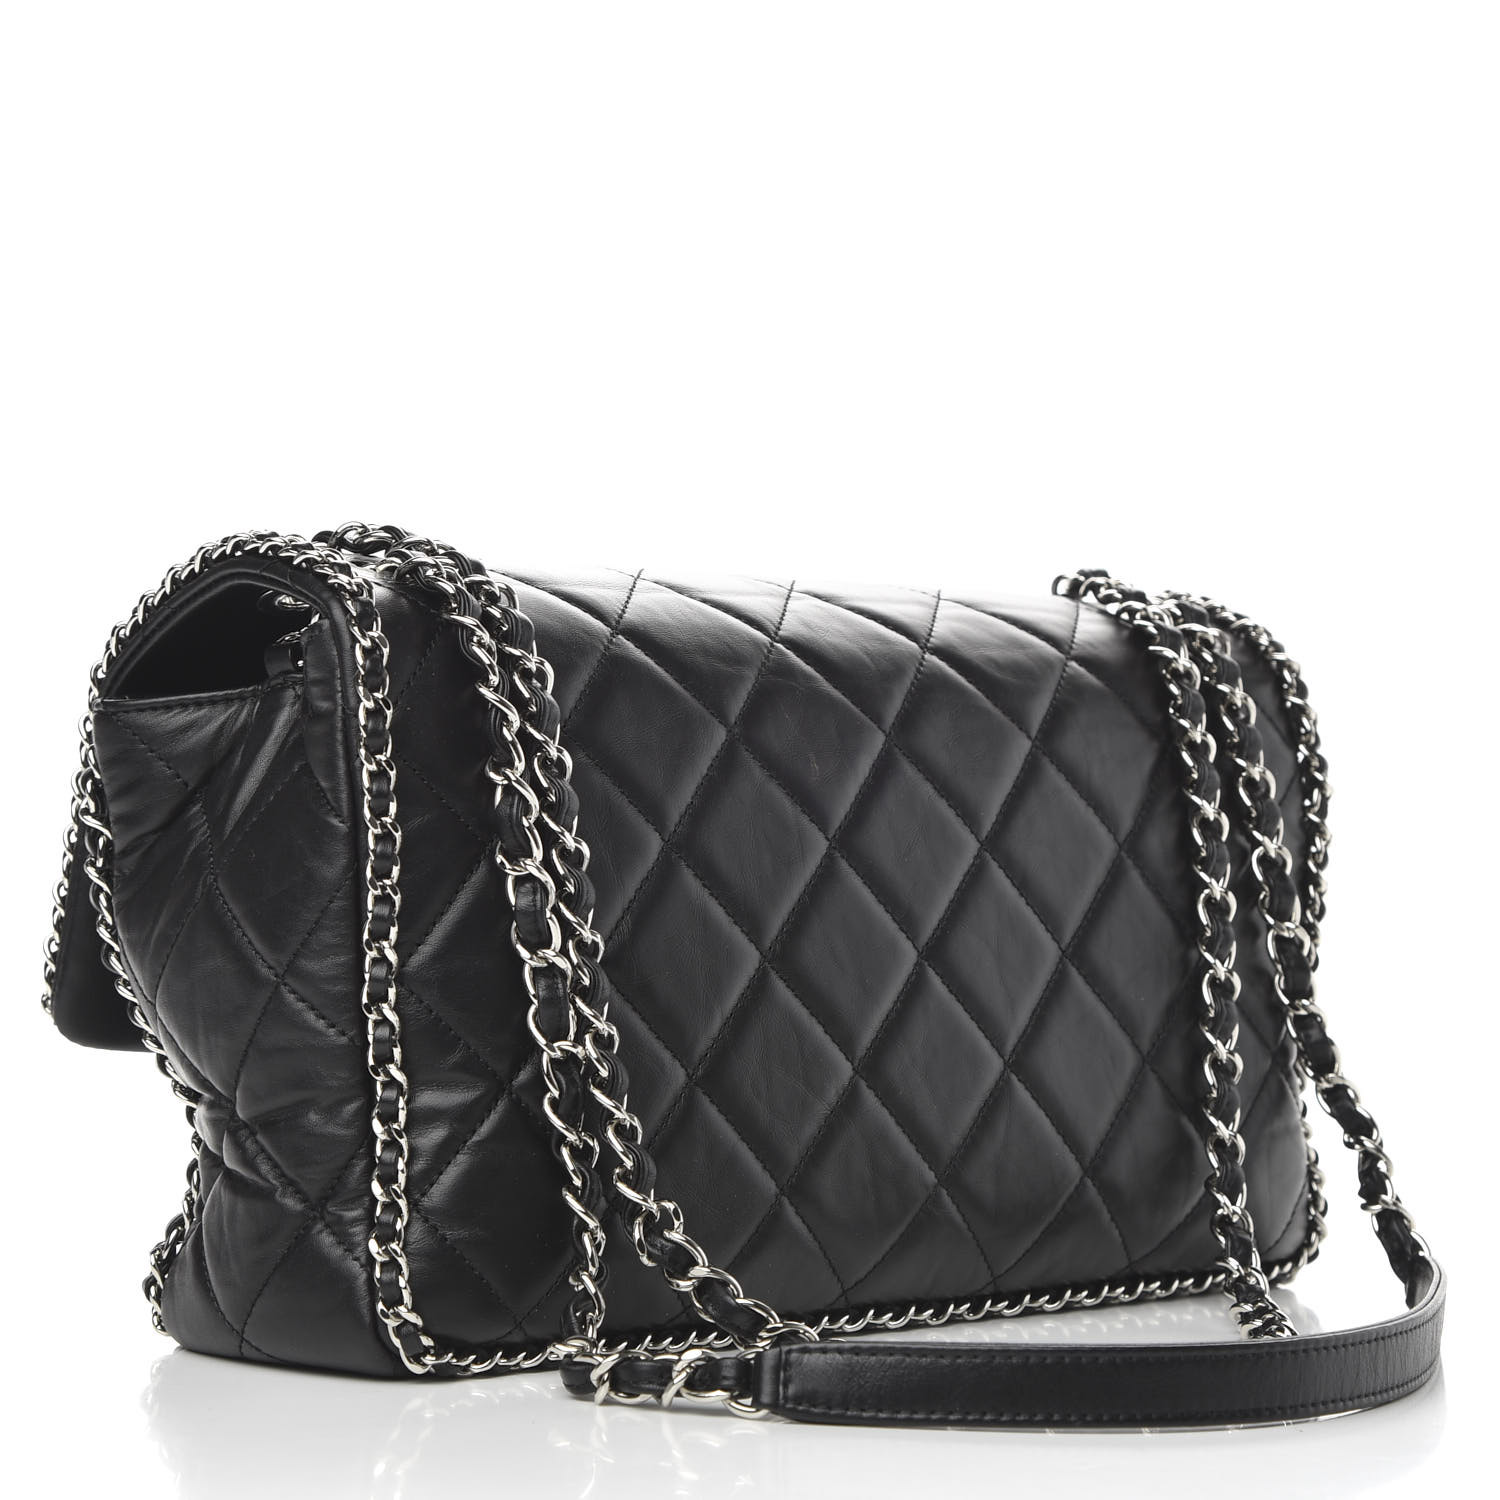 CHANEL Crumpled Calfskin Quilted Large Chain All Over Flap Bag Black ...